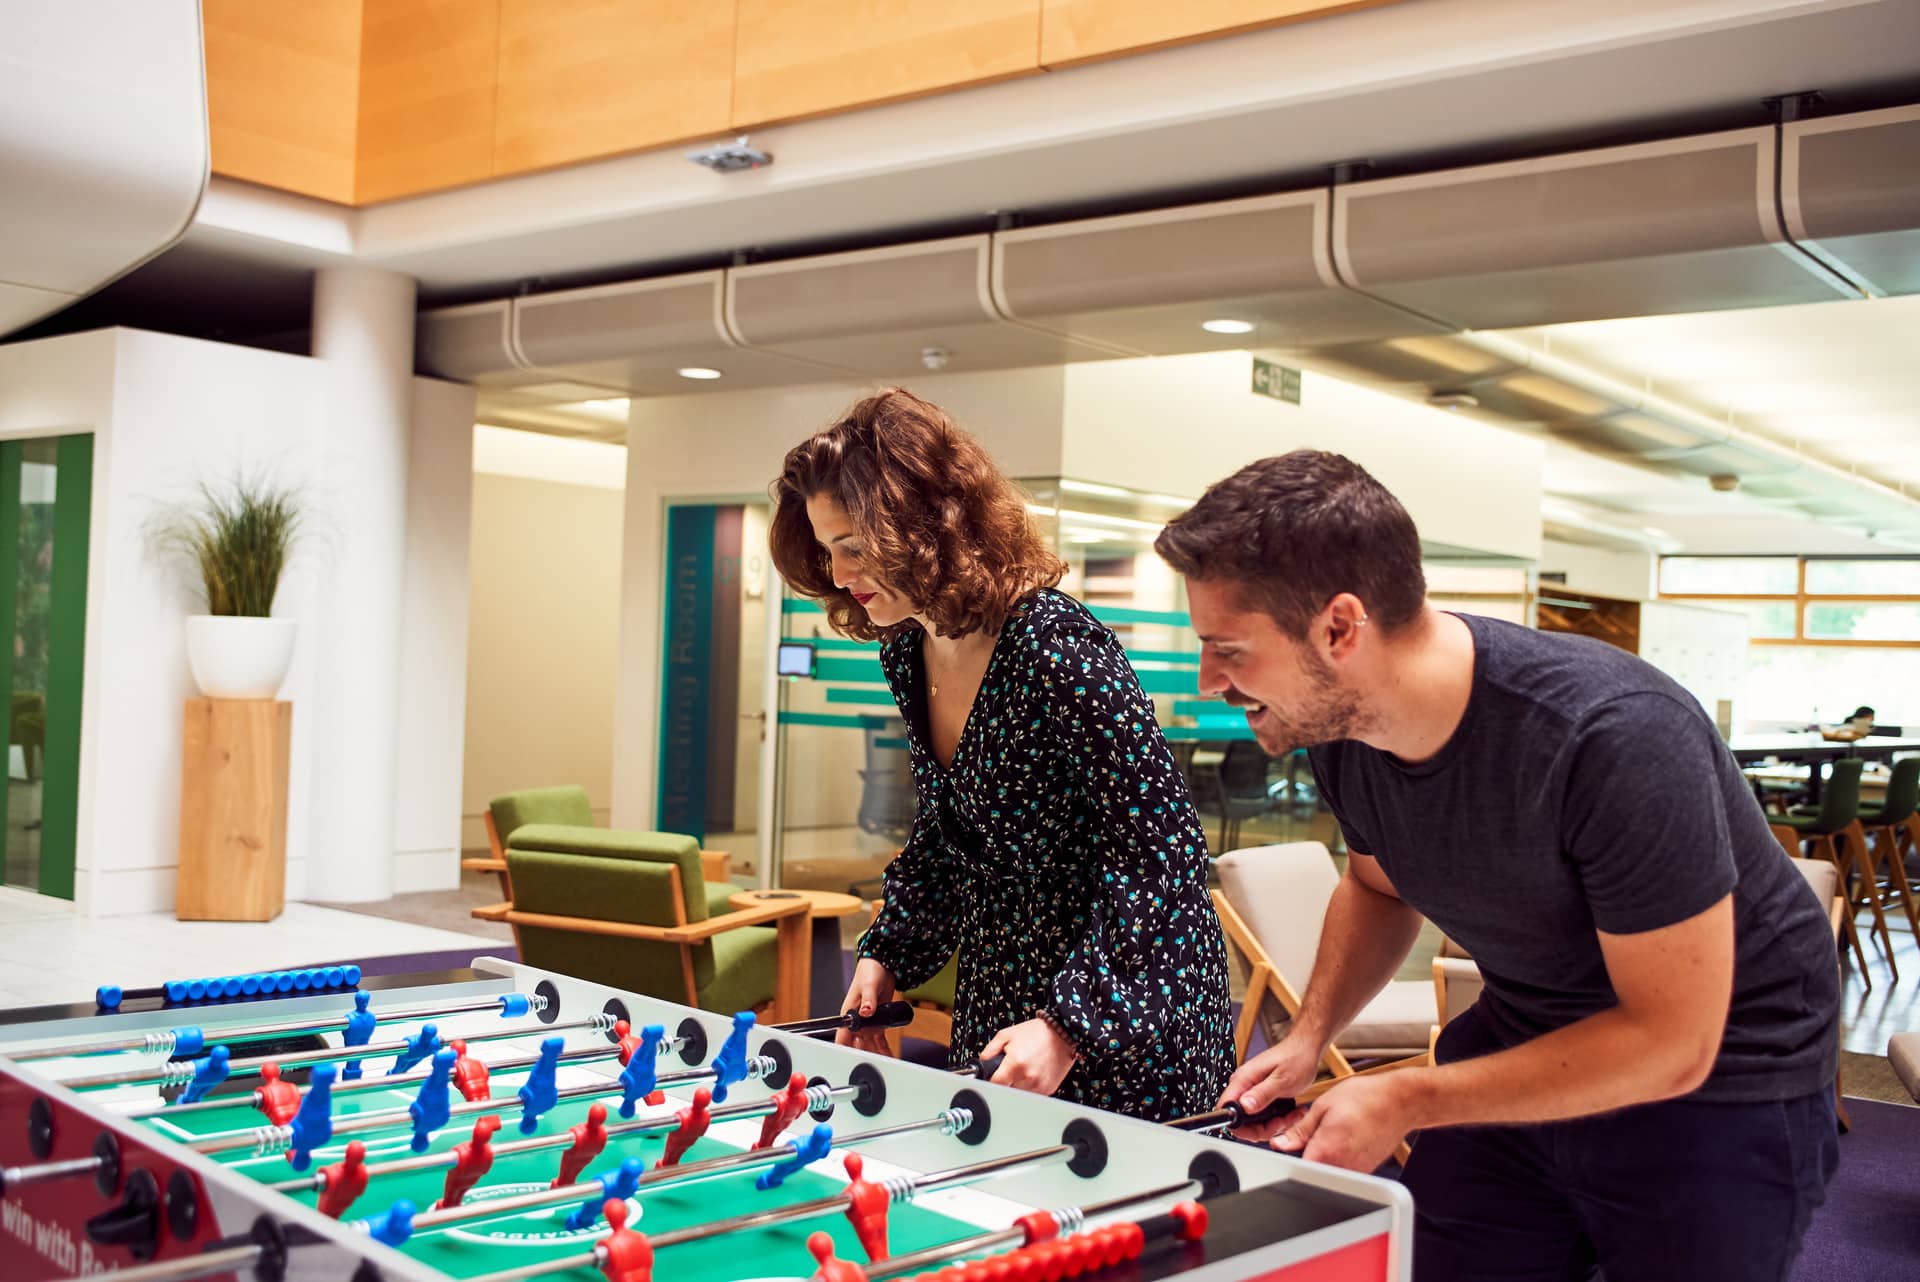 Two people playing a game of foosball in the office